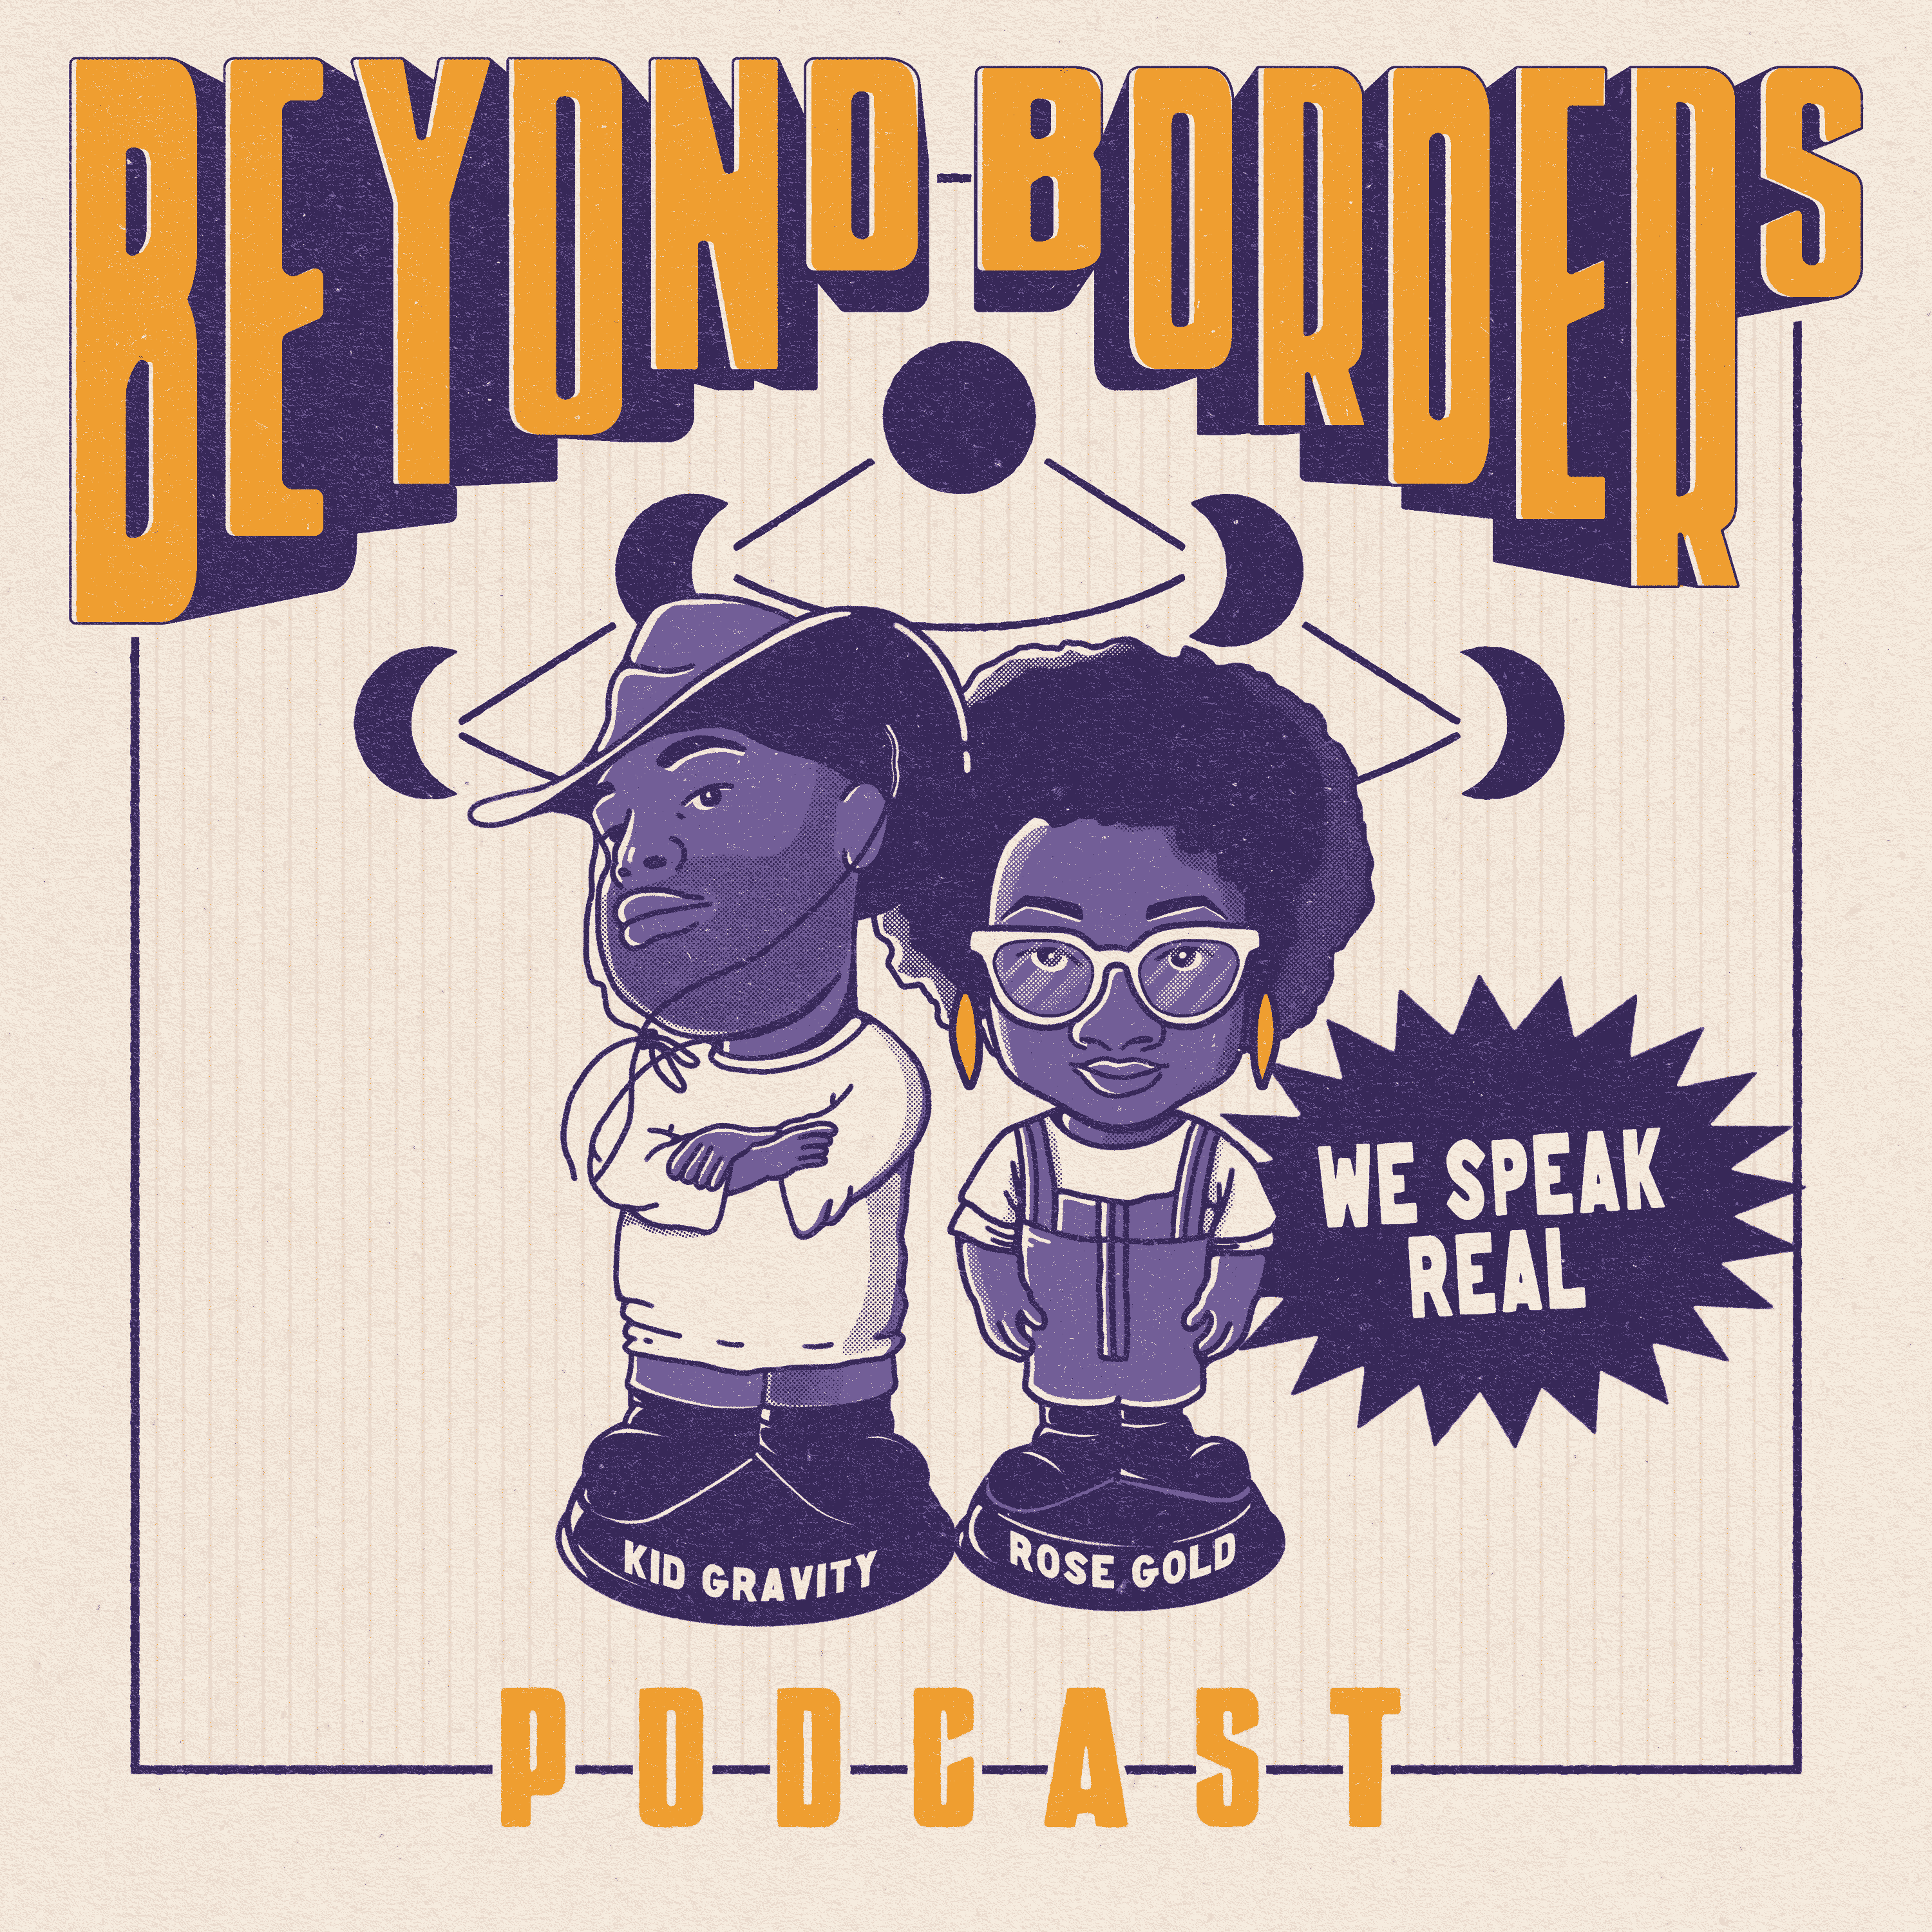 Beyond Borders With RoseGold & Kid Gravity